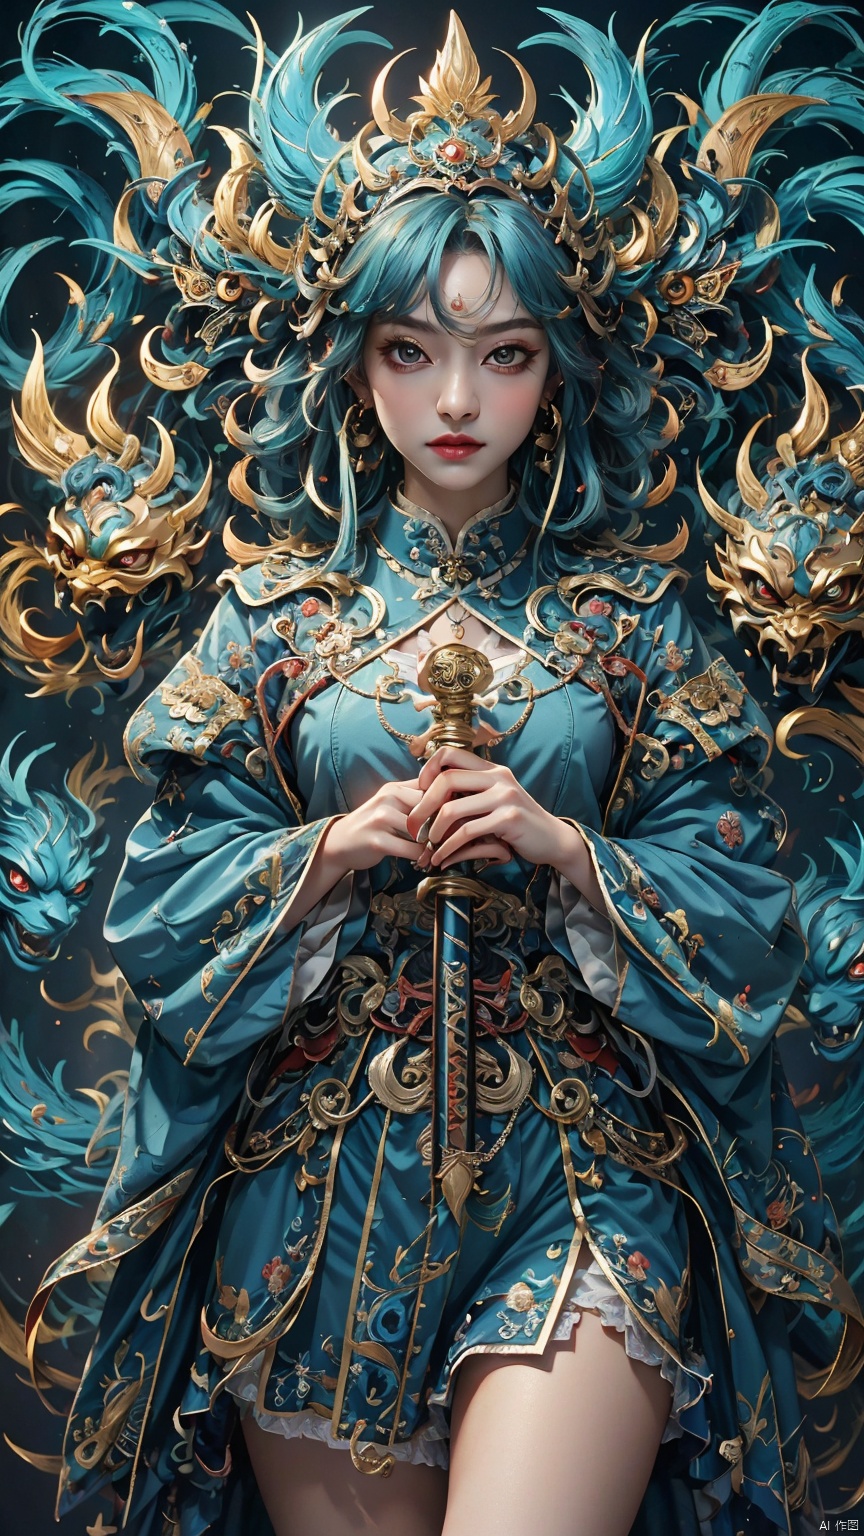 1 girl, solo, female focal point, (wearing a blue monster mask) (Japanese yaksha) (blue costume) (bright photo) (kimono) (skirt), long hair, (Chinese clothing) red lips, bangs, earrings, kimono, Chinese cardigan, print, tassels, sword (straight sword)
Elemental whirlwind.
(Masterpiece), (Detailed CG Unity 8K Wallpaper), Best Quality, High Resolution Illustrations, Amazing, Highres, (Front View) (Positive Light) (Best Lighting, Best Shadows, A Very Exquisite and Beautiful), (Enhanced)